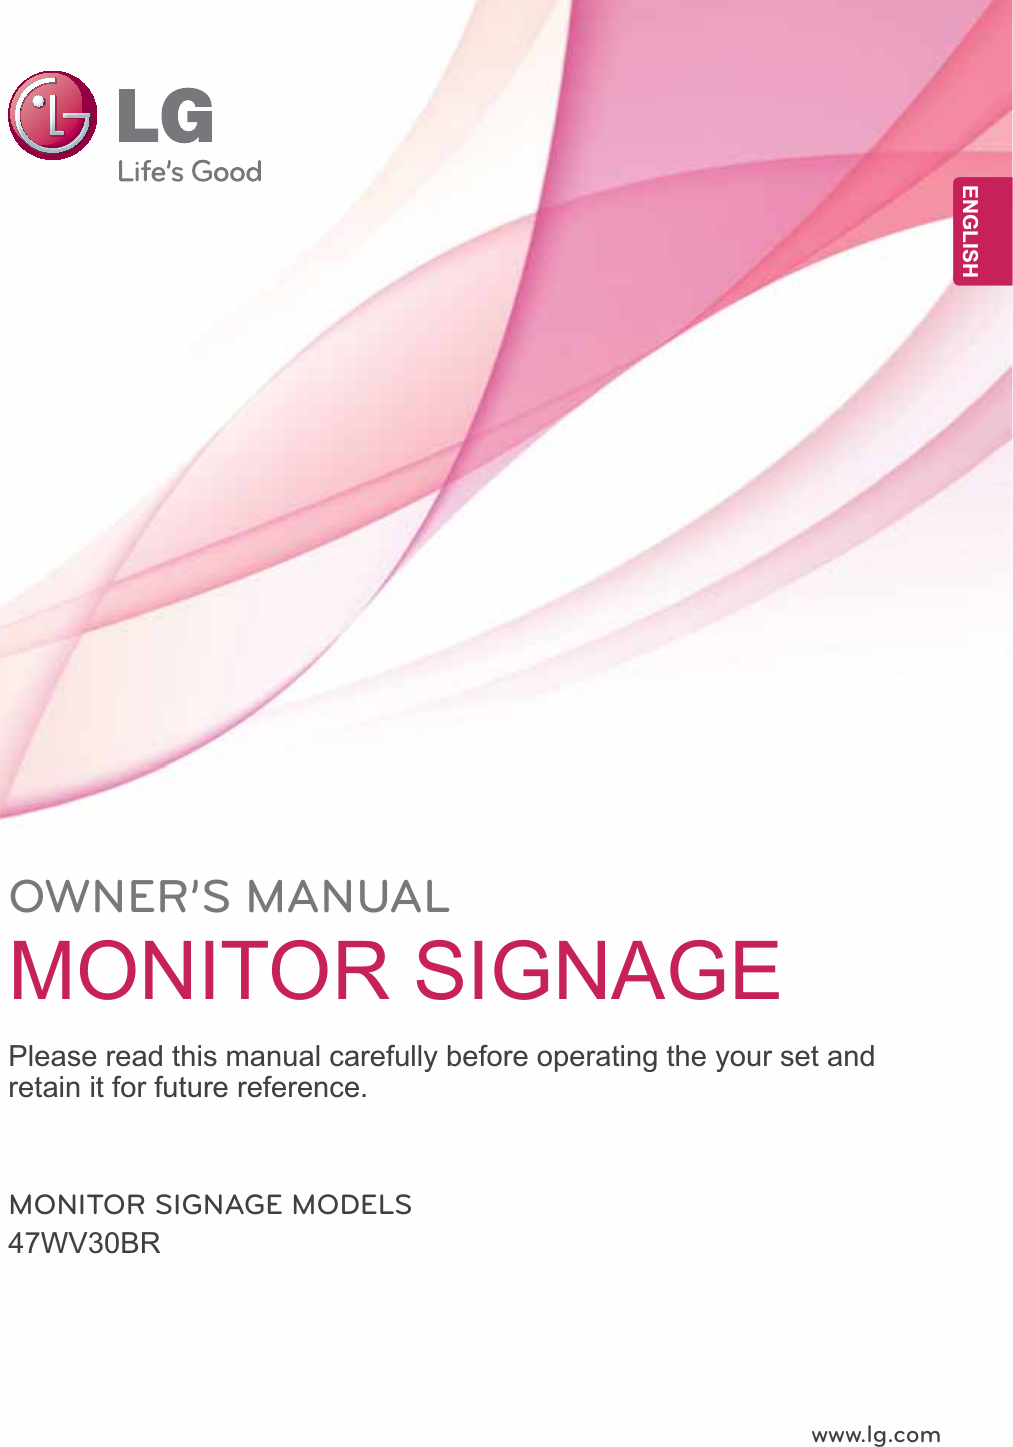 www.lg.comOWNER’S MANUALMONITOR SIGNAGE47WV30BRPlease read this manual carefully before operating the your set and retain it for future reference.MONITOR SIGNAGE MODELSENGENGLISH